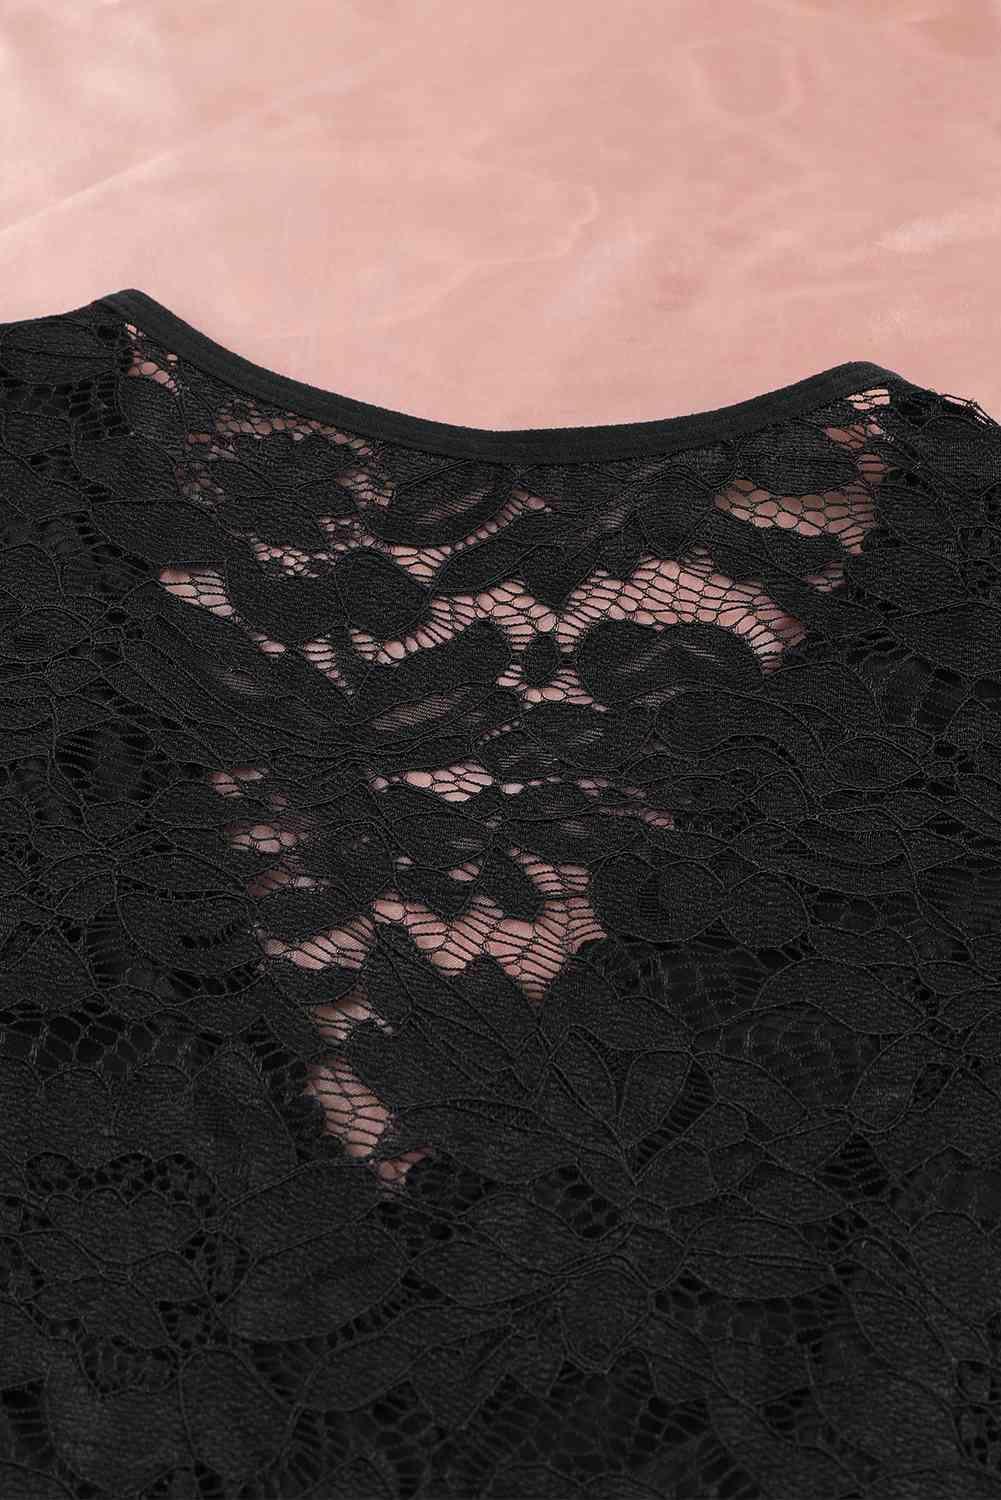 a close up of a black lace top